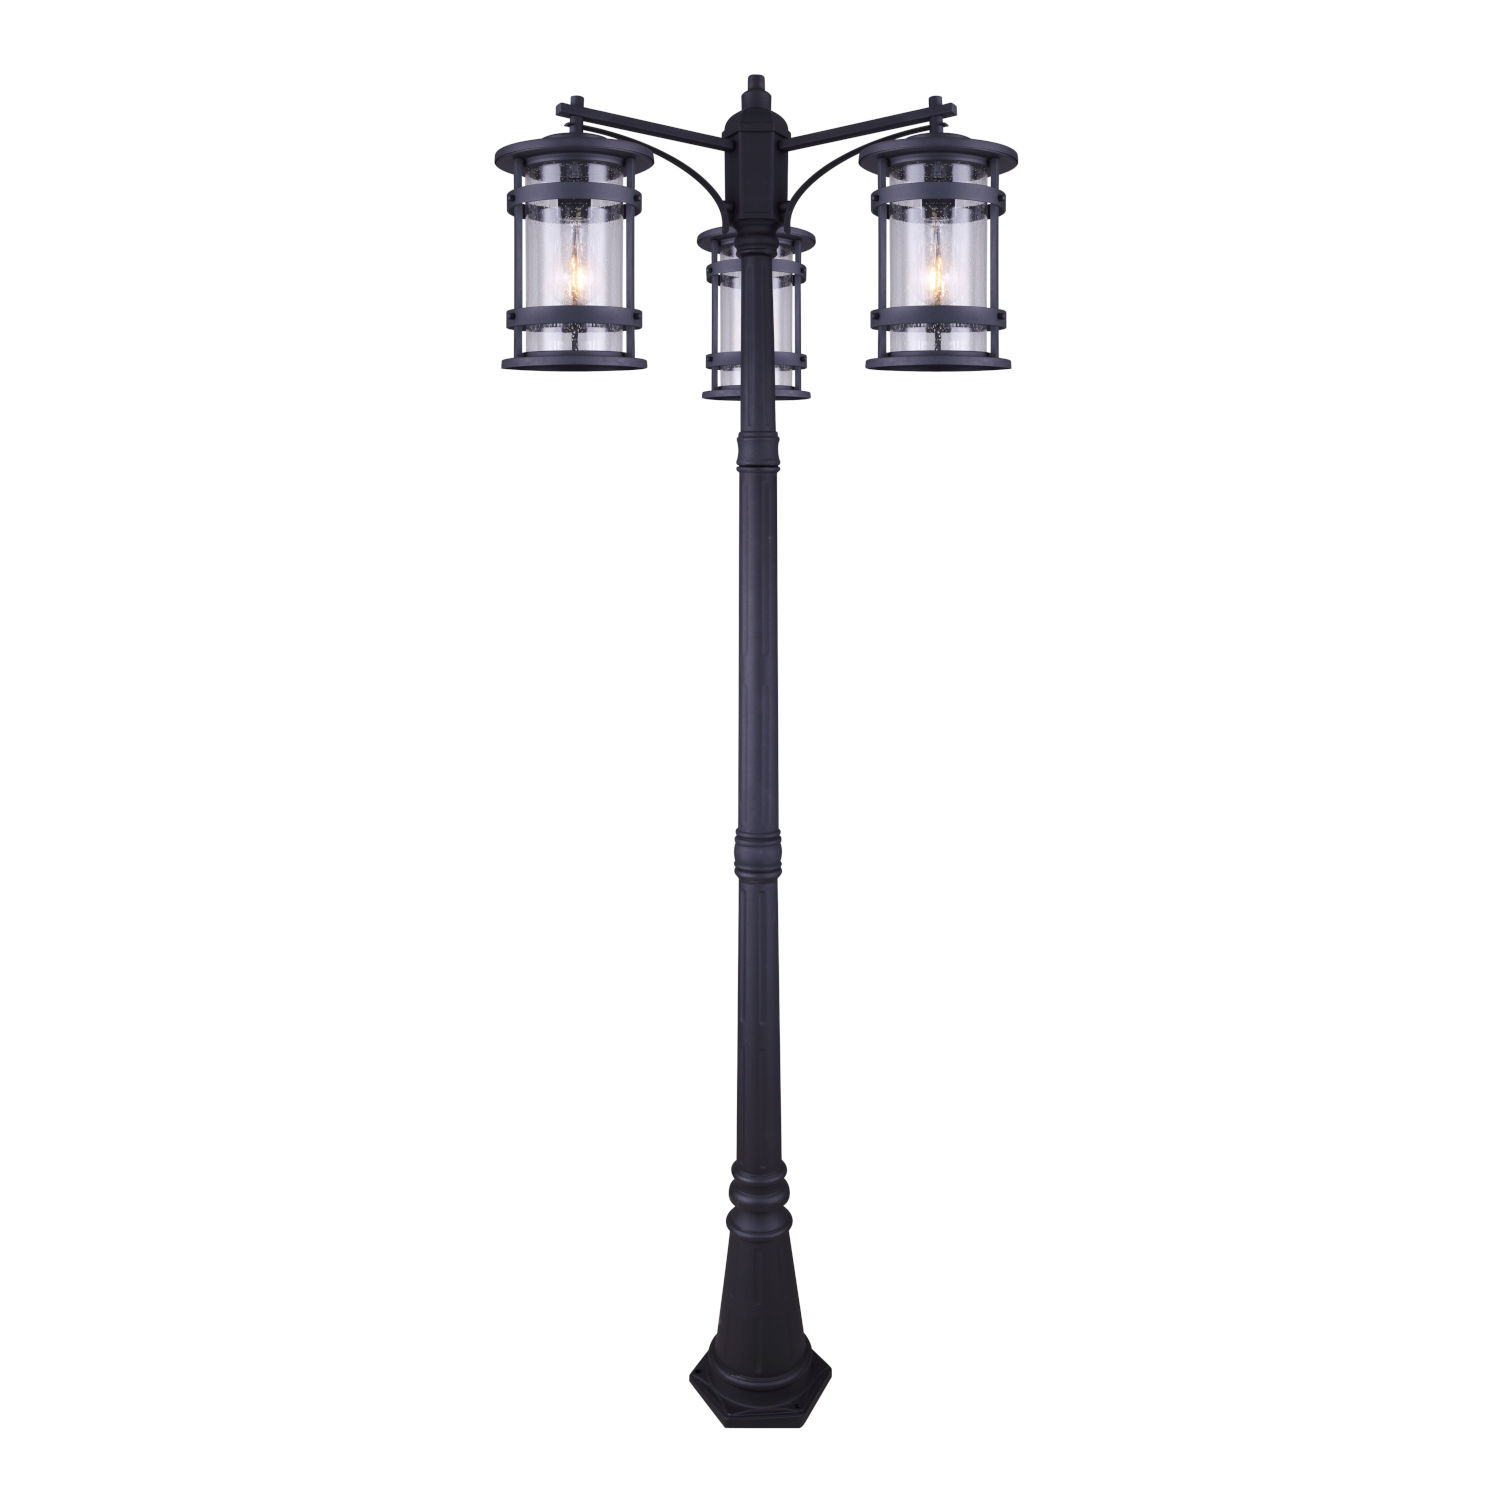 Outdoor Post Lighting Category